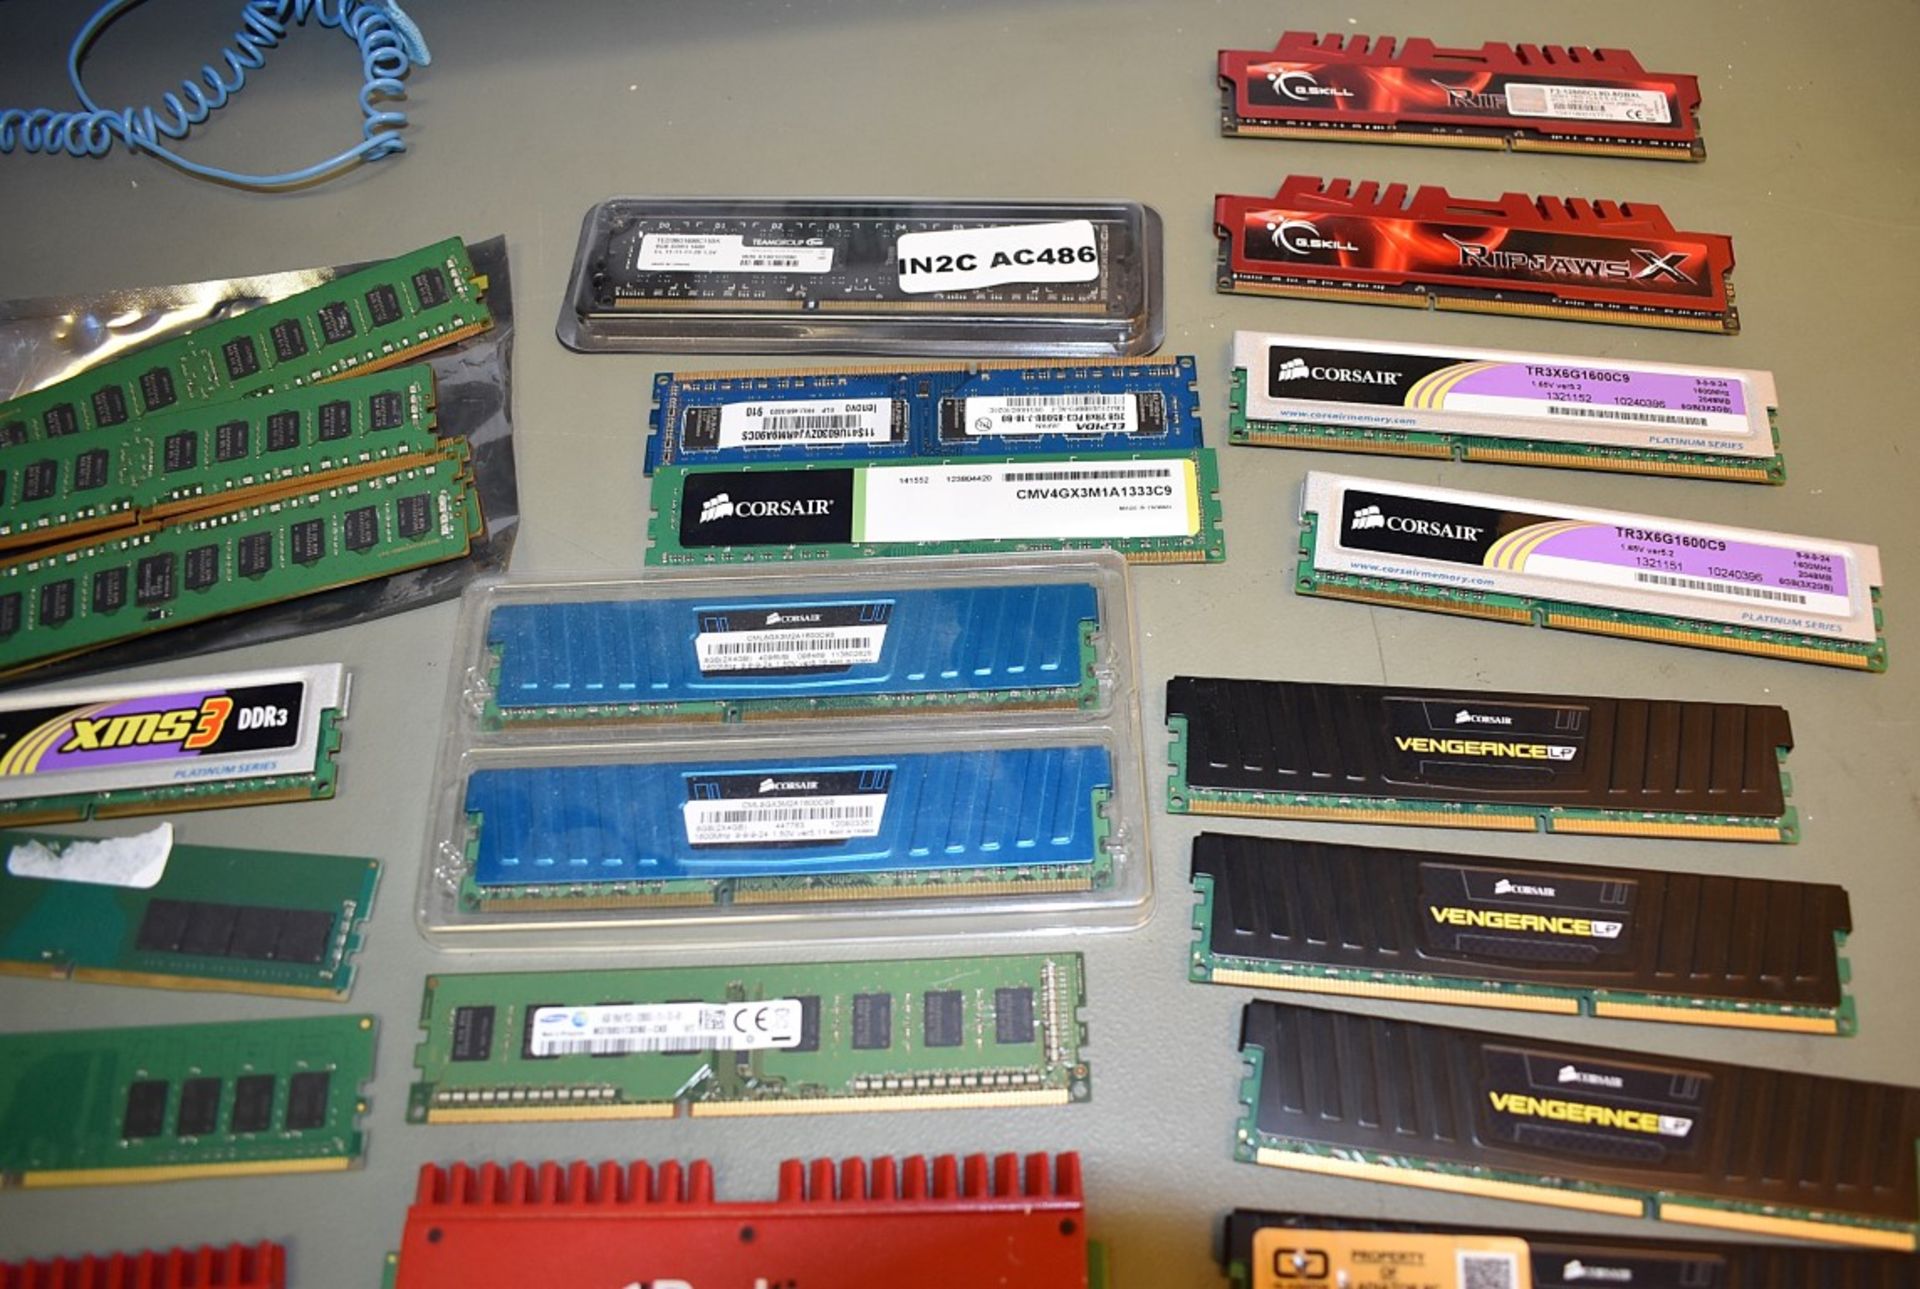 26 x Sticks of DDR3 Memory - Various Brands and Sizes - Ref: AC486 GFITL - CL646 - Location: - Image 3 of 5